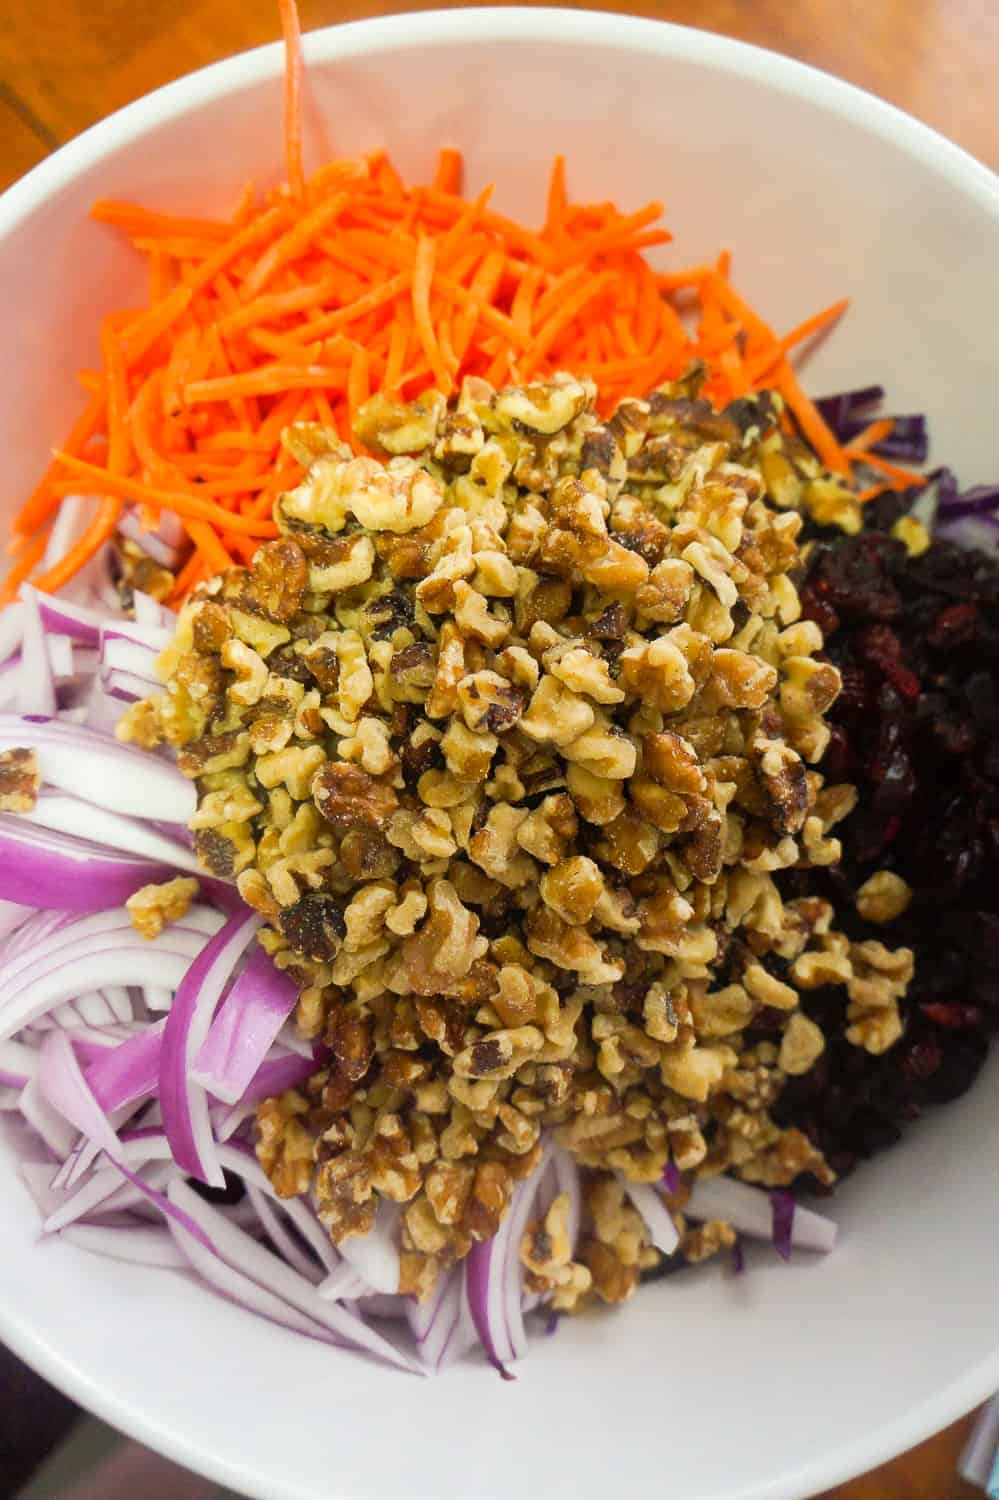 shredded carrots, sliced onion, walnut pieces and dried cranberries in a mixing bowl